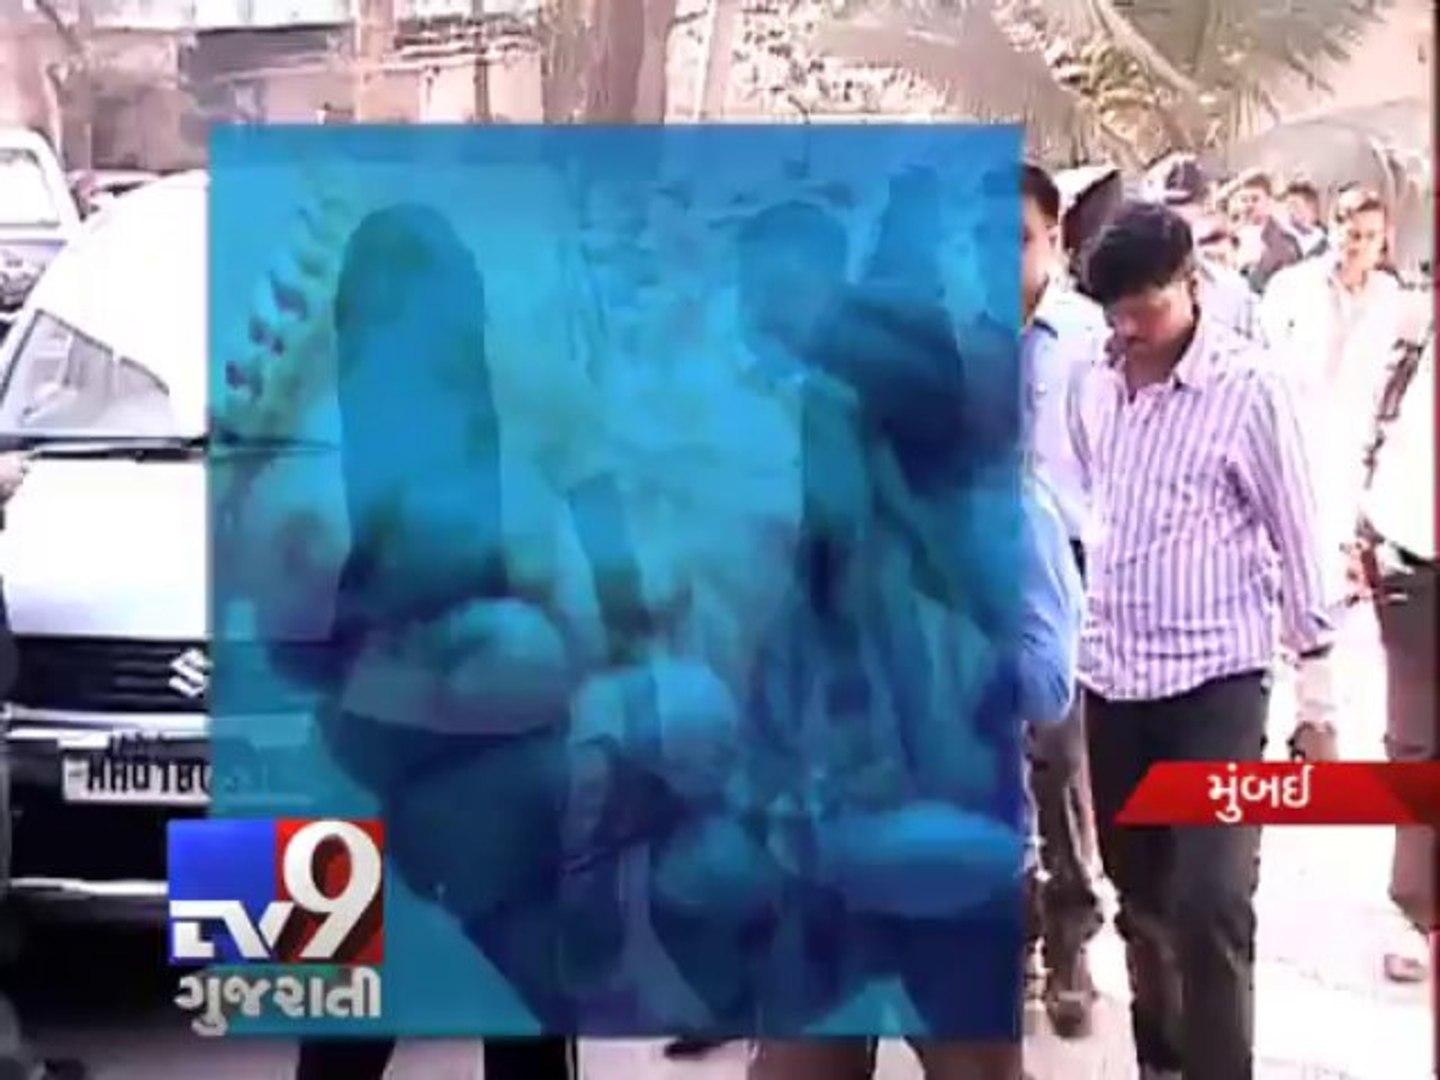 Impotent man forced wife into sex with his friends, Mumbai - Tv9 Gujarati photo